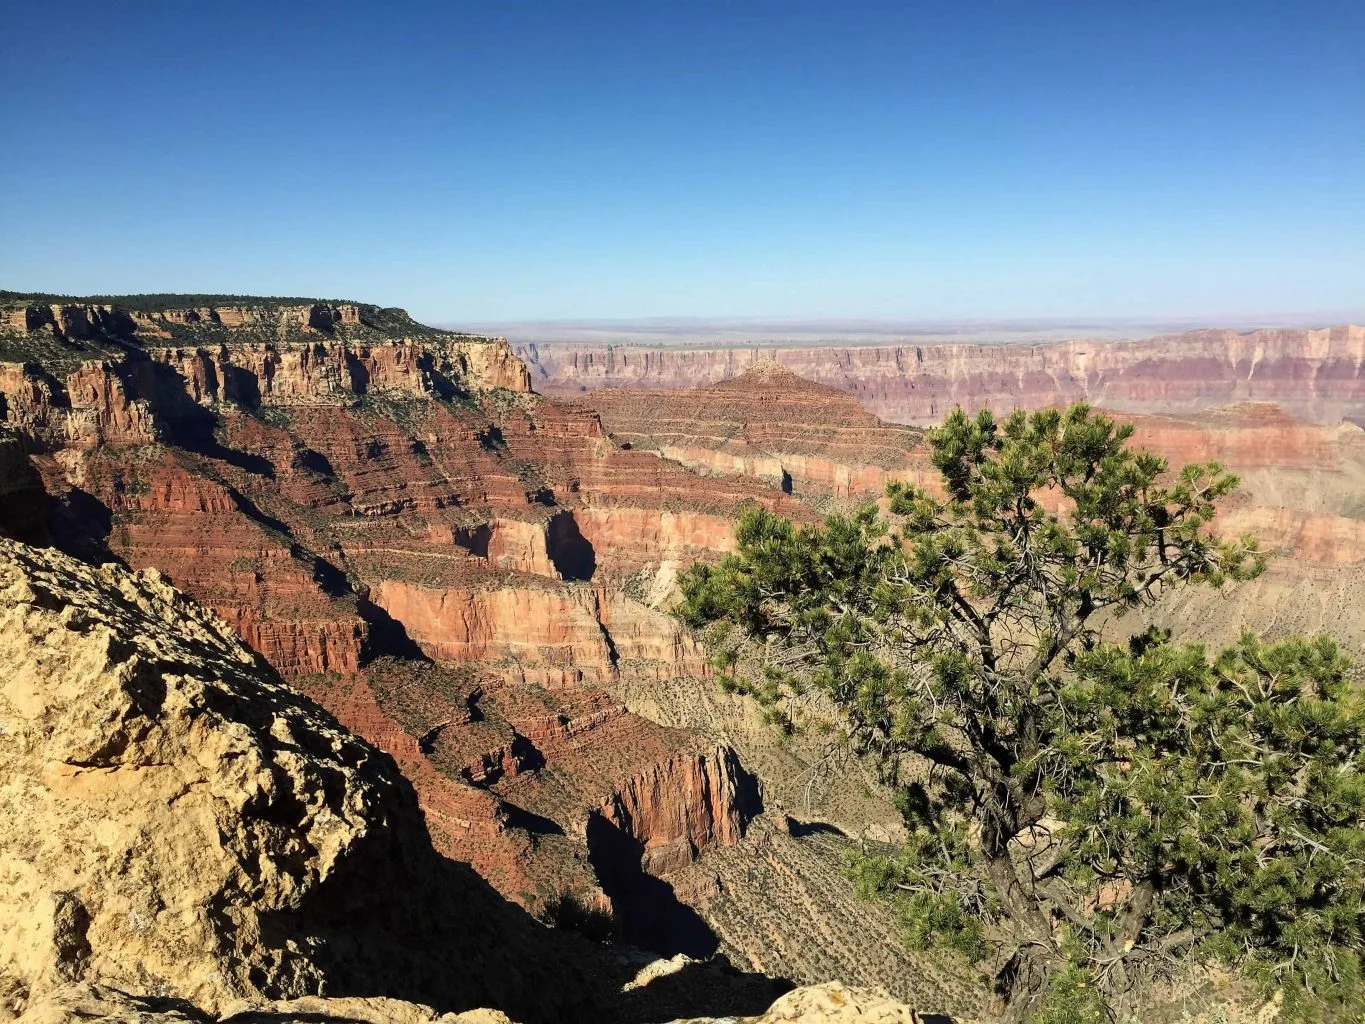 Have too much stuff? Do more. Visit the Grand Canyon